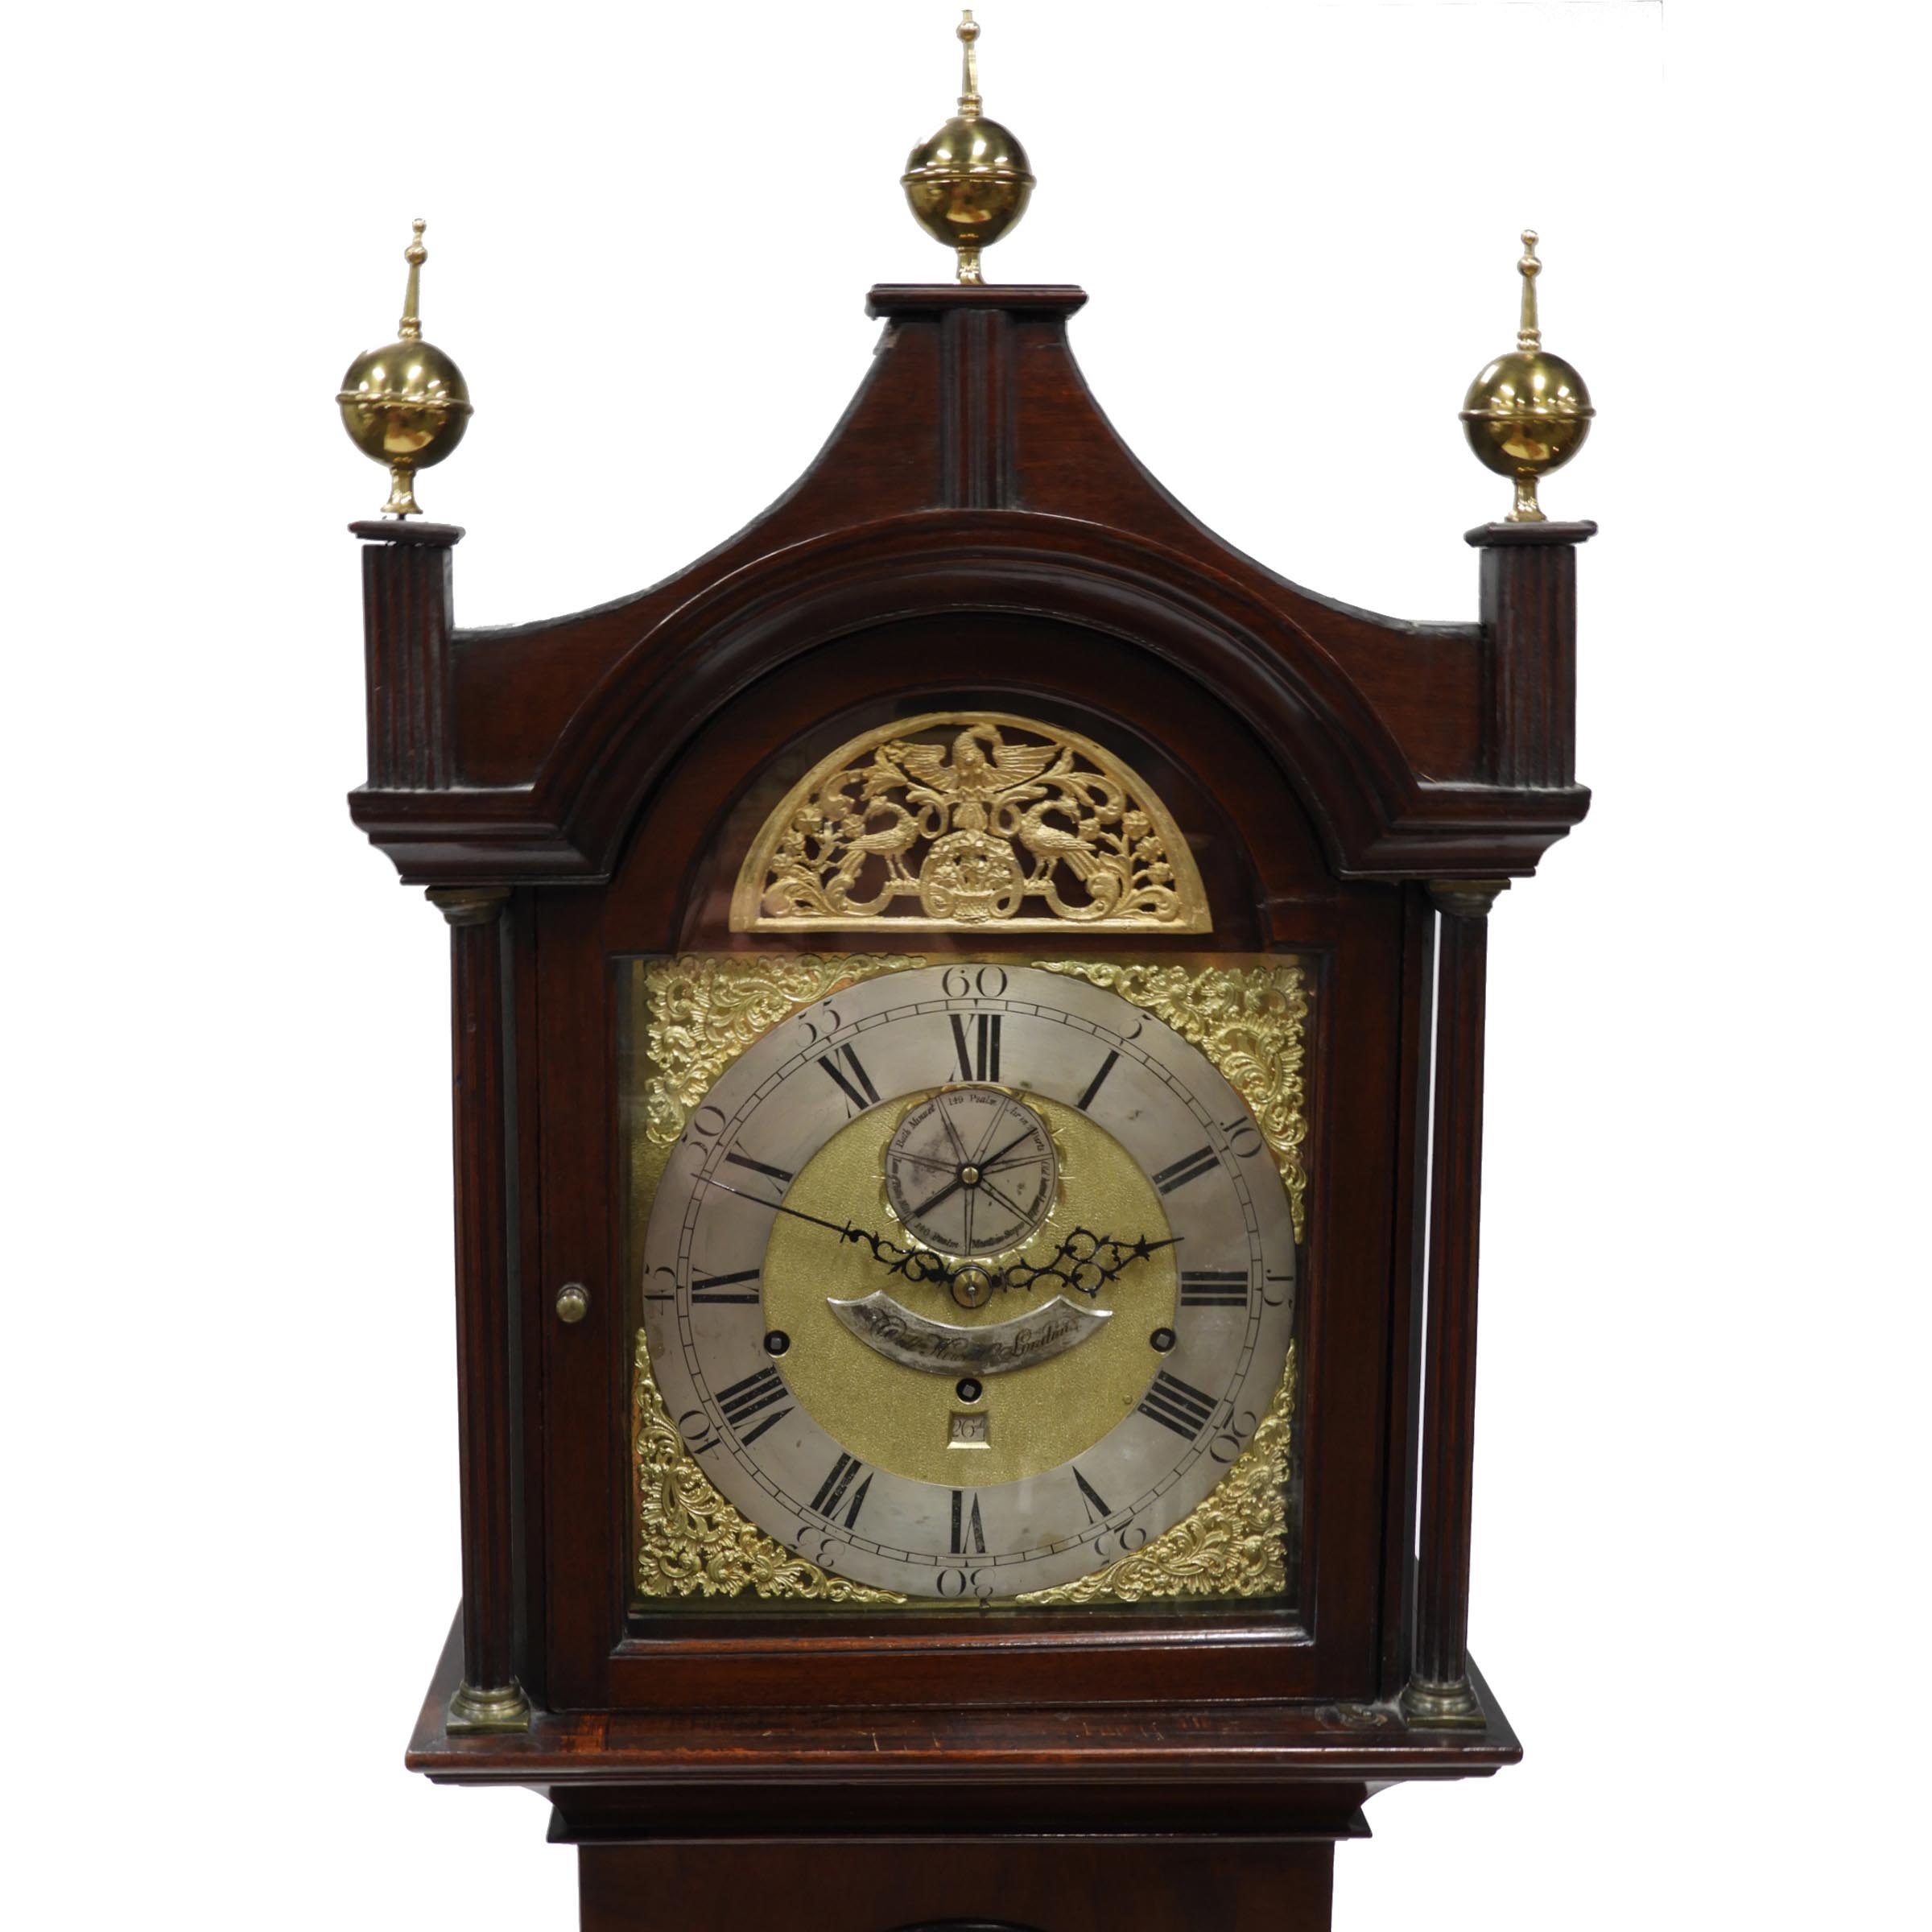 English Mahogany Quarter Striking Musical Tall Case Clock, William Hewett, London, early-mid 18th century and later